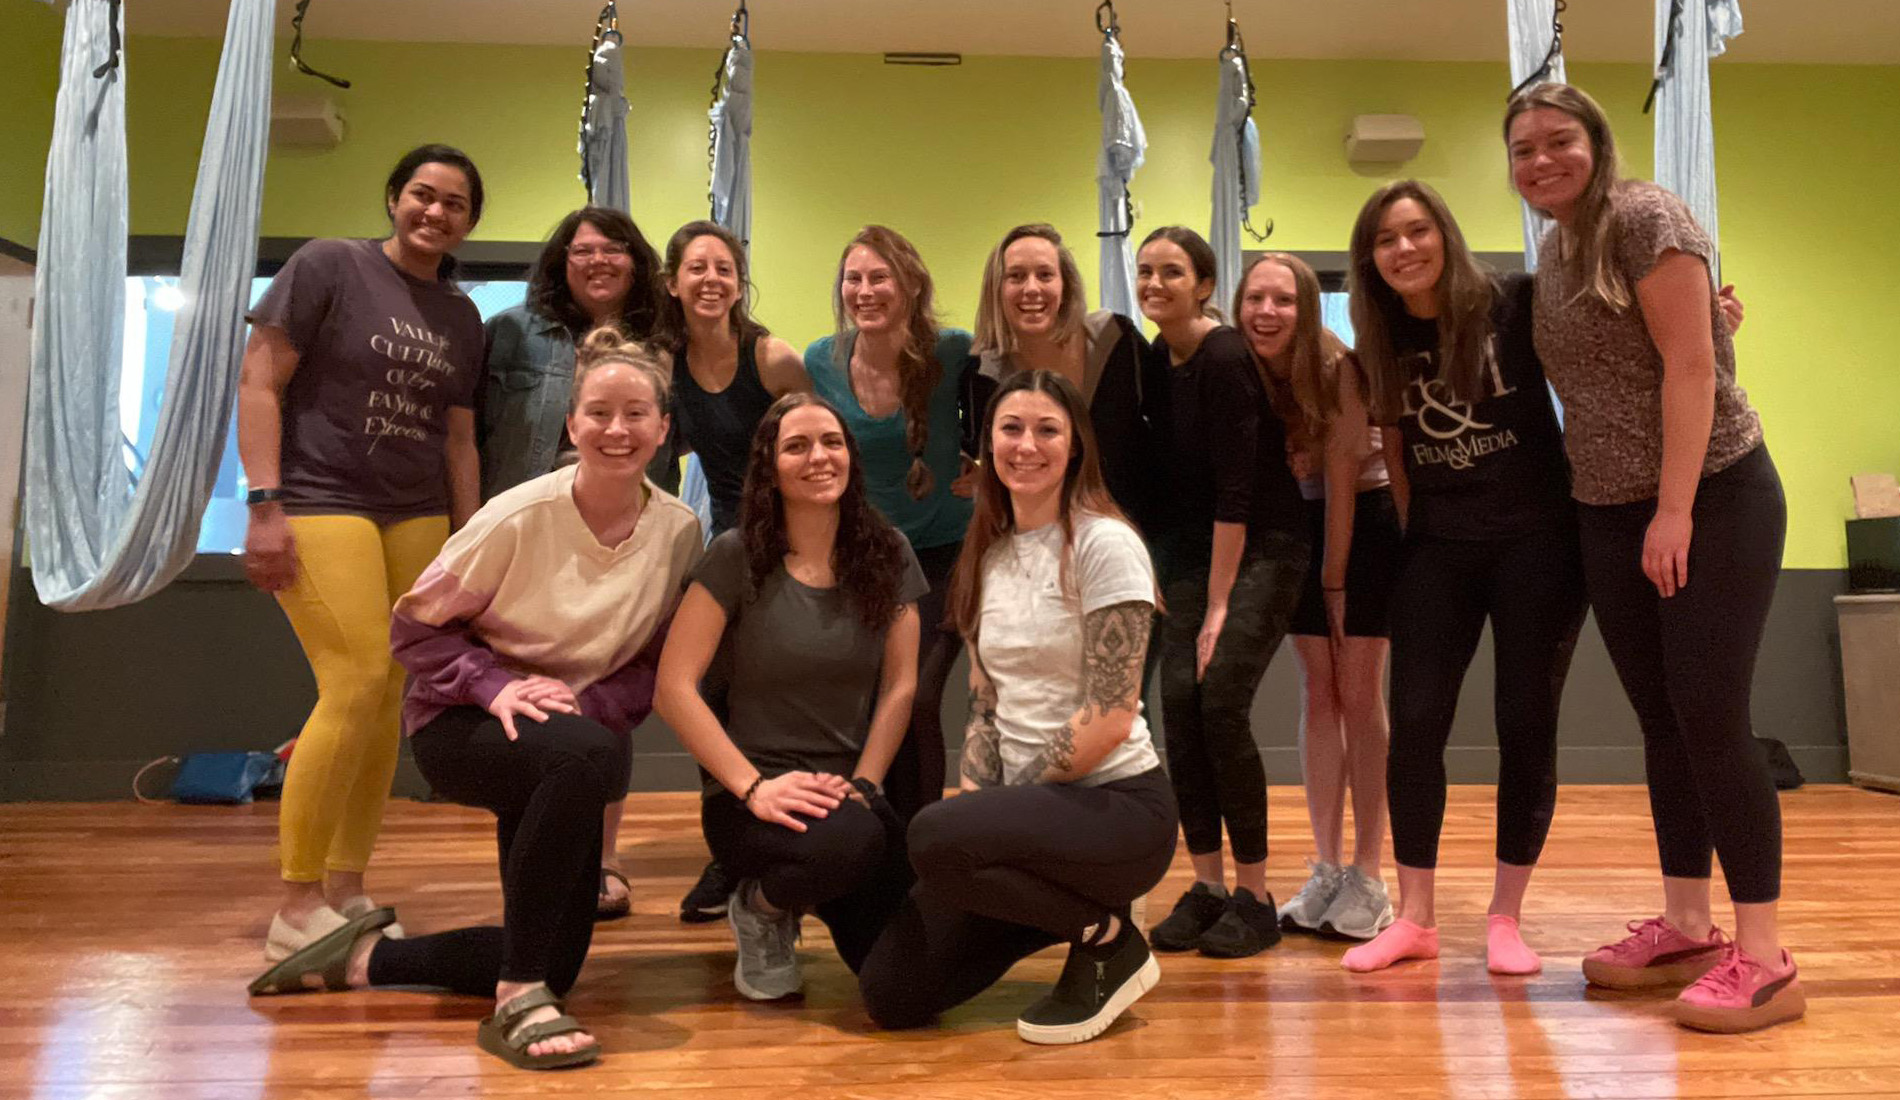 Group photo after an Aerial Fitness party at Sanctuary Body